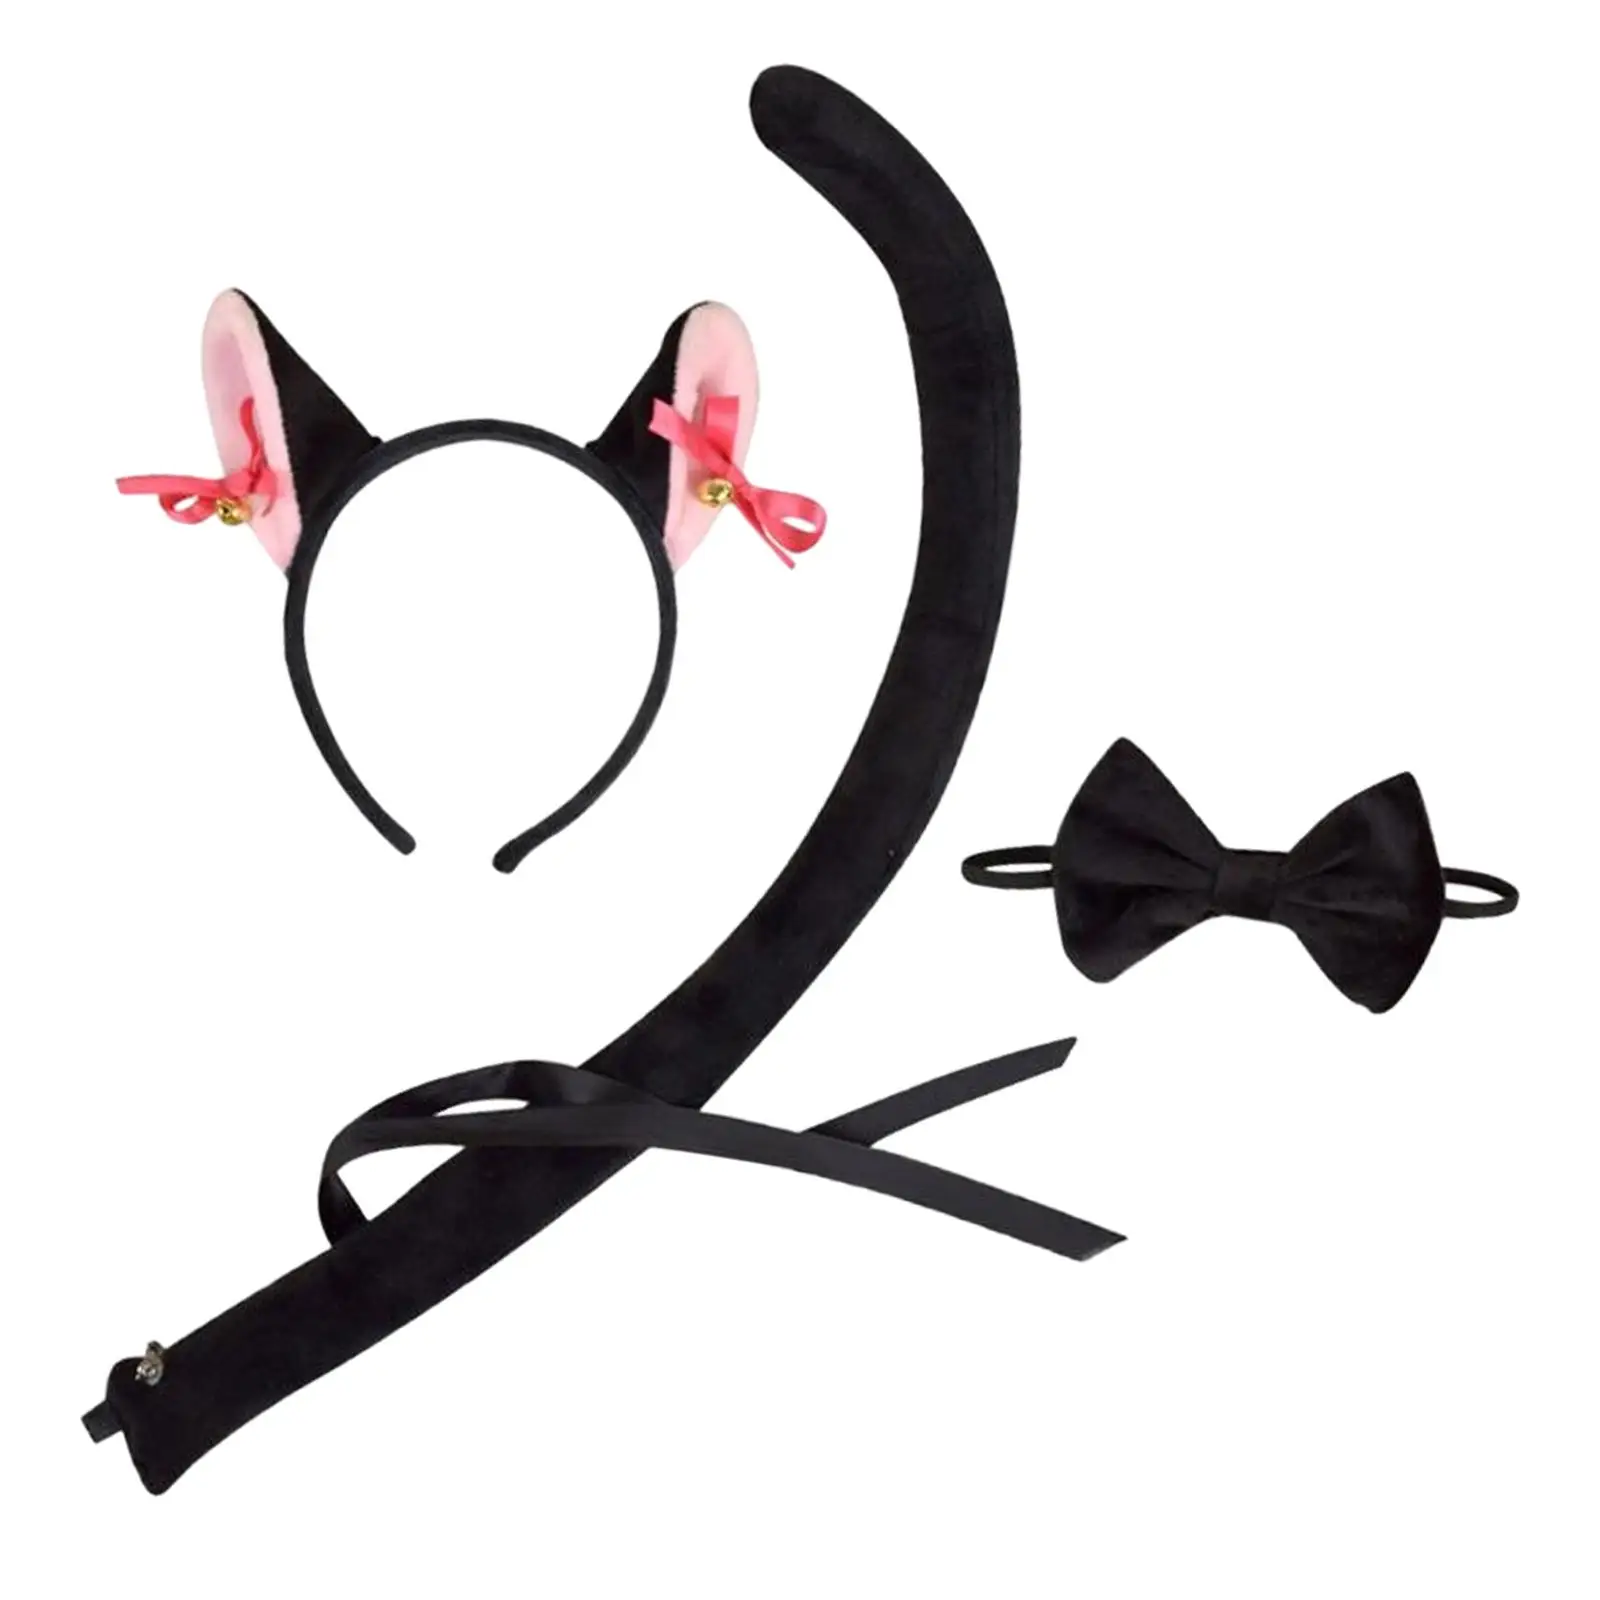 Kids Cat Ears, Bow Tie and Tail Set Makeup Props Animal Costume Set for Themed Party Roles Play Performance Birthdays Holidays